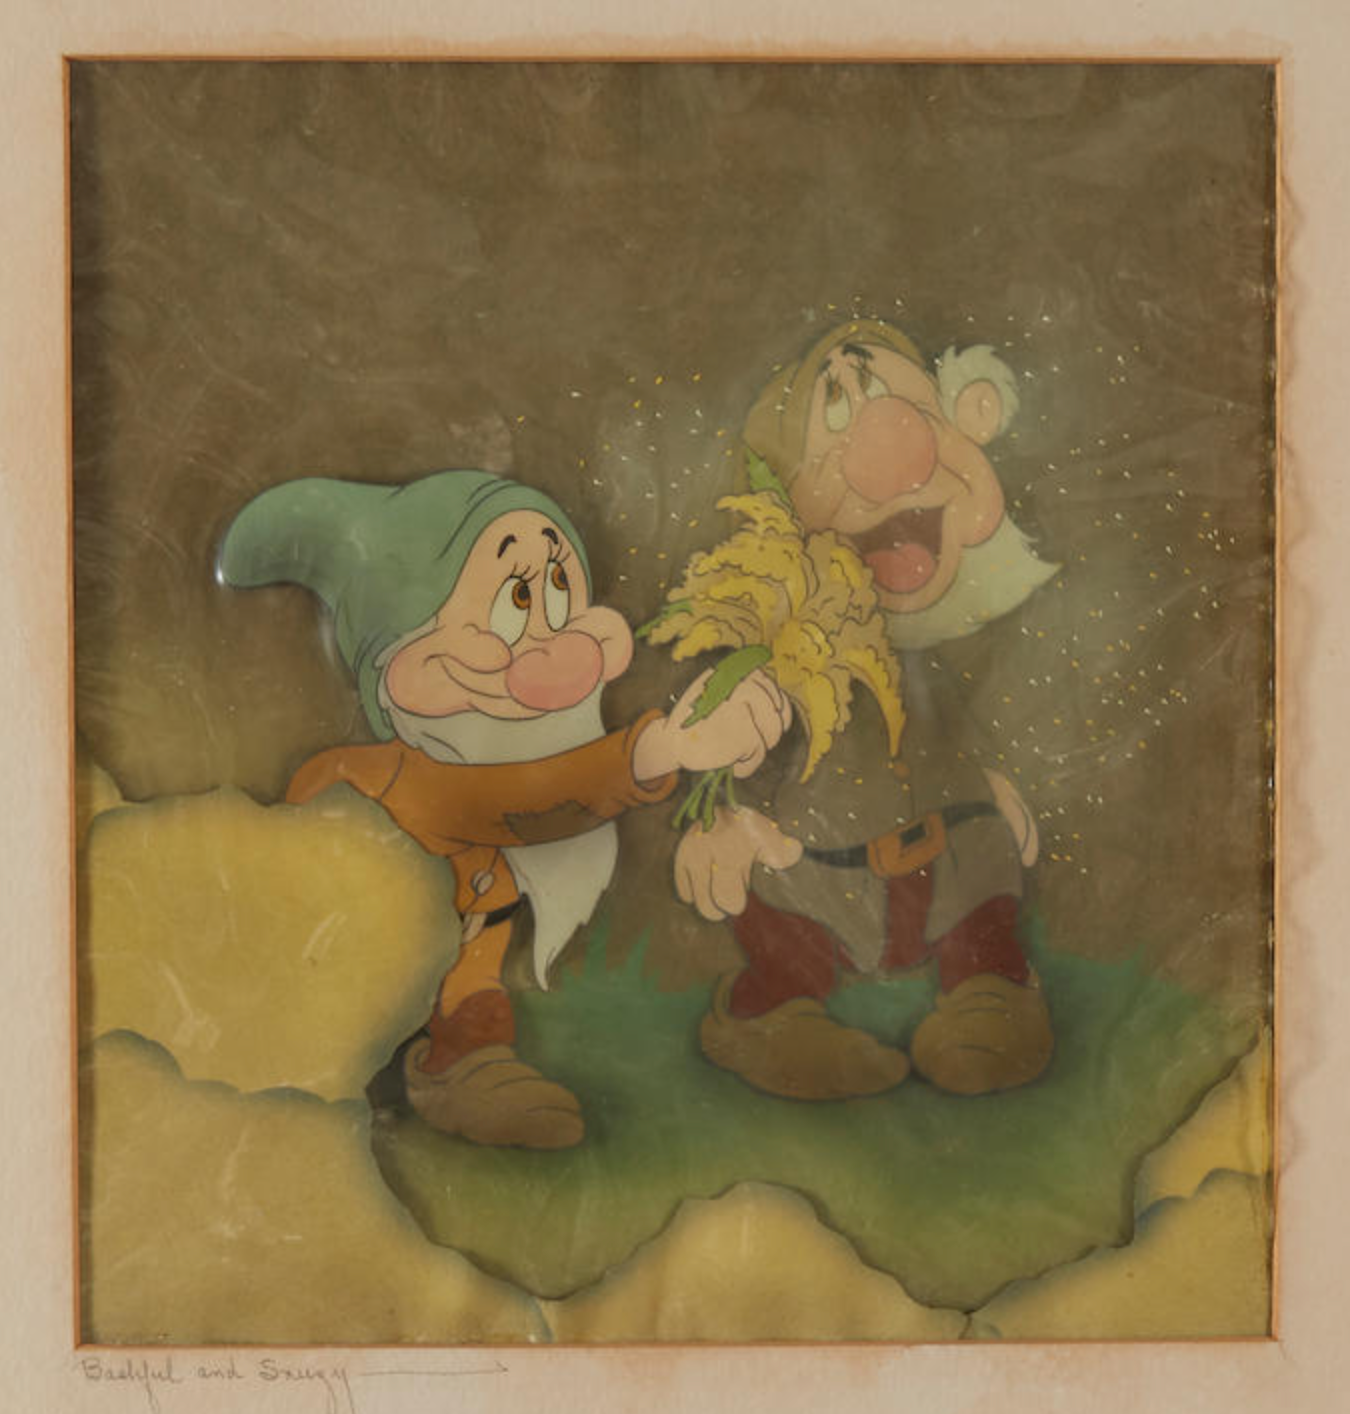 Original Walt Disney Production Cels on Courvoisier Background from Snow White and the Seven Dwarfs